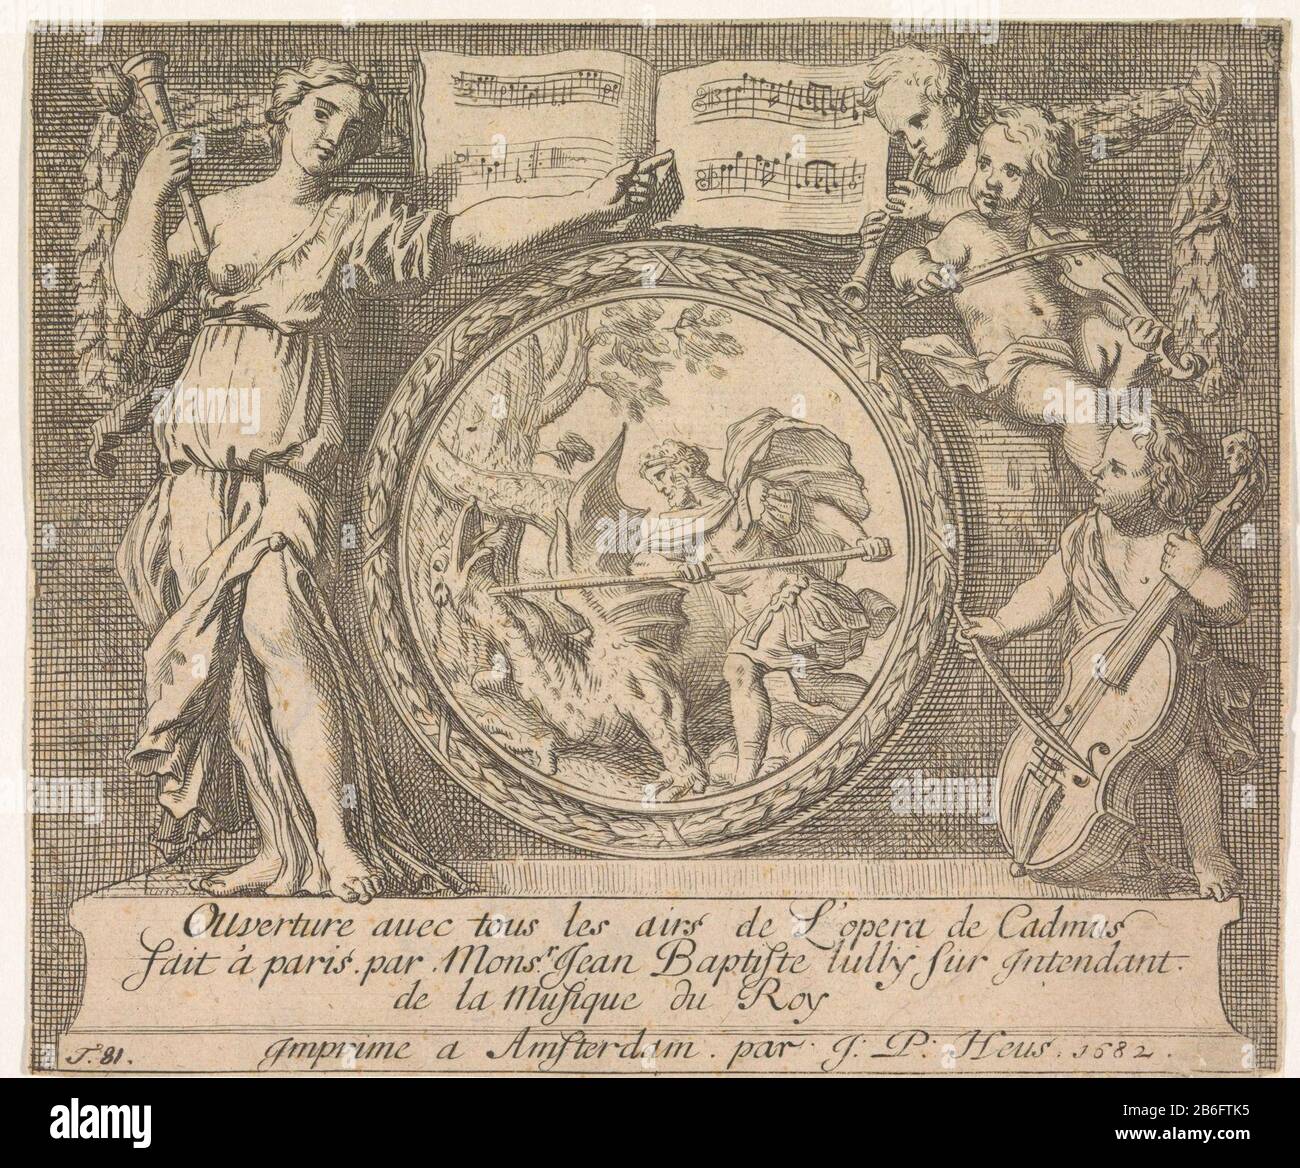 Cadmus kills the dragon Cadmus kills the dragon that devoured his companions. The mythological scene is captured in a medallion-shaped table. Left them pointing a woman with a flute on sheet music over the list. Right putti play three different instruments. Underneath the picture is a three-line signature in Frans. Manufacturer : printmaker: Gerard de Lairesse Publisher: Jean Philip Heus (listed property) Place manufacture: Amsterdam Date: 1682 Physical features: etching material: paper Technique: etching Dimensions: print: H 154 mm × W 183 mm Subject: Cadmus slays the dragoncupids' amores', ' Stock Photo